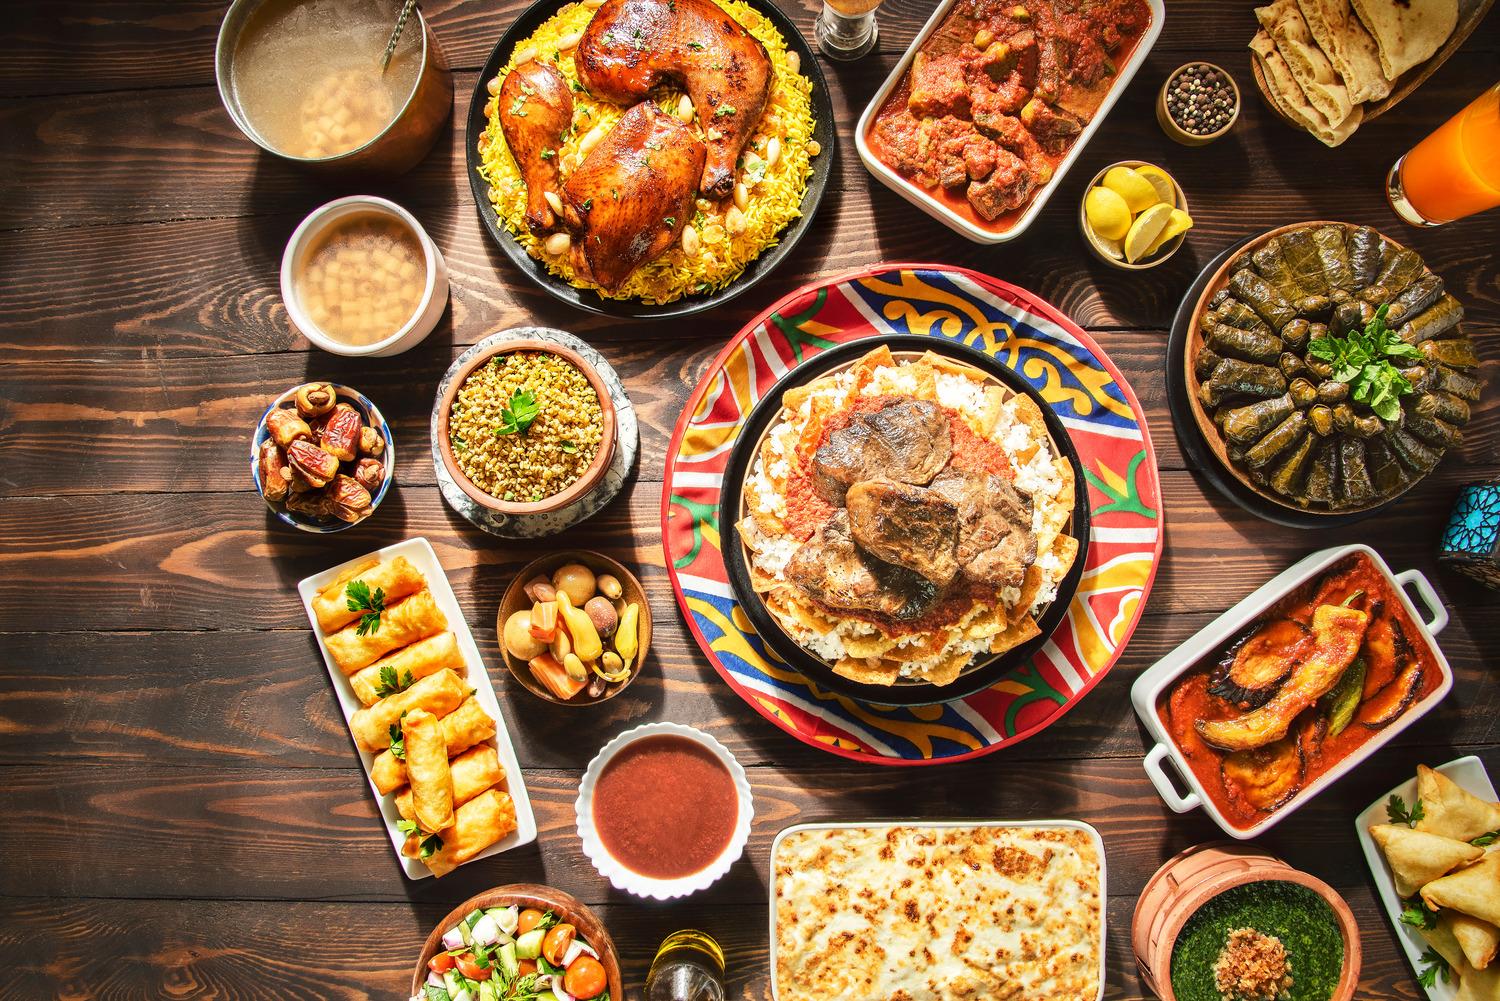 Best Arabic restaurants in Dubai: Aromas & flavors of the Middle-East!